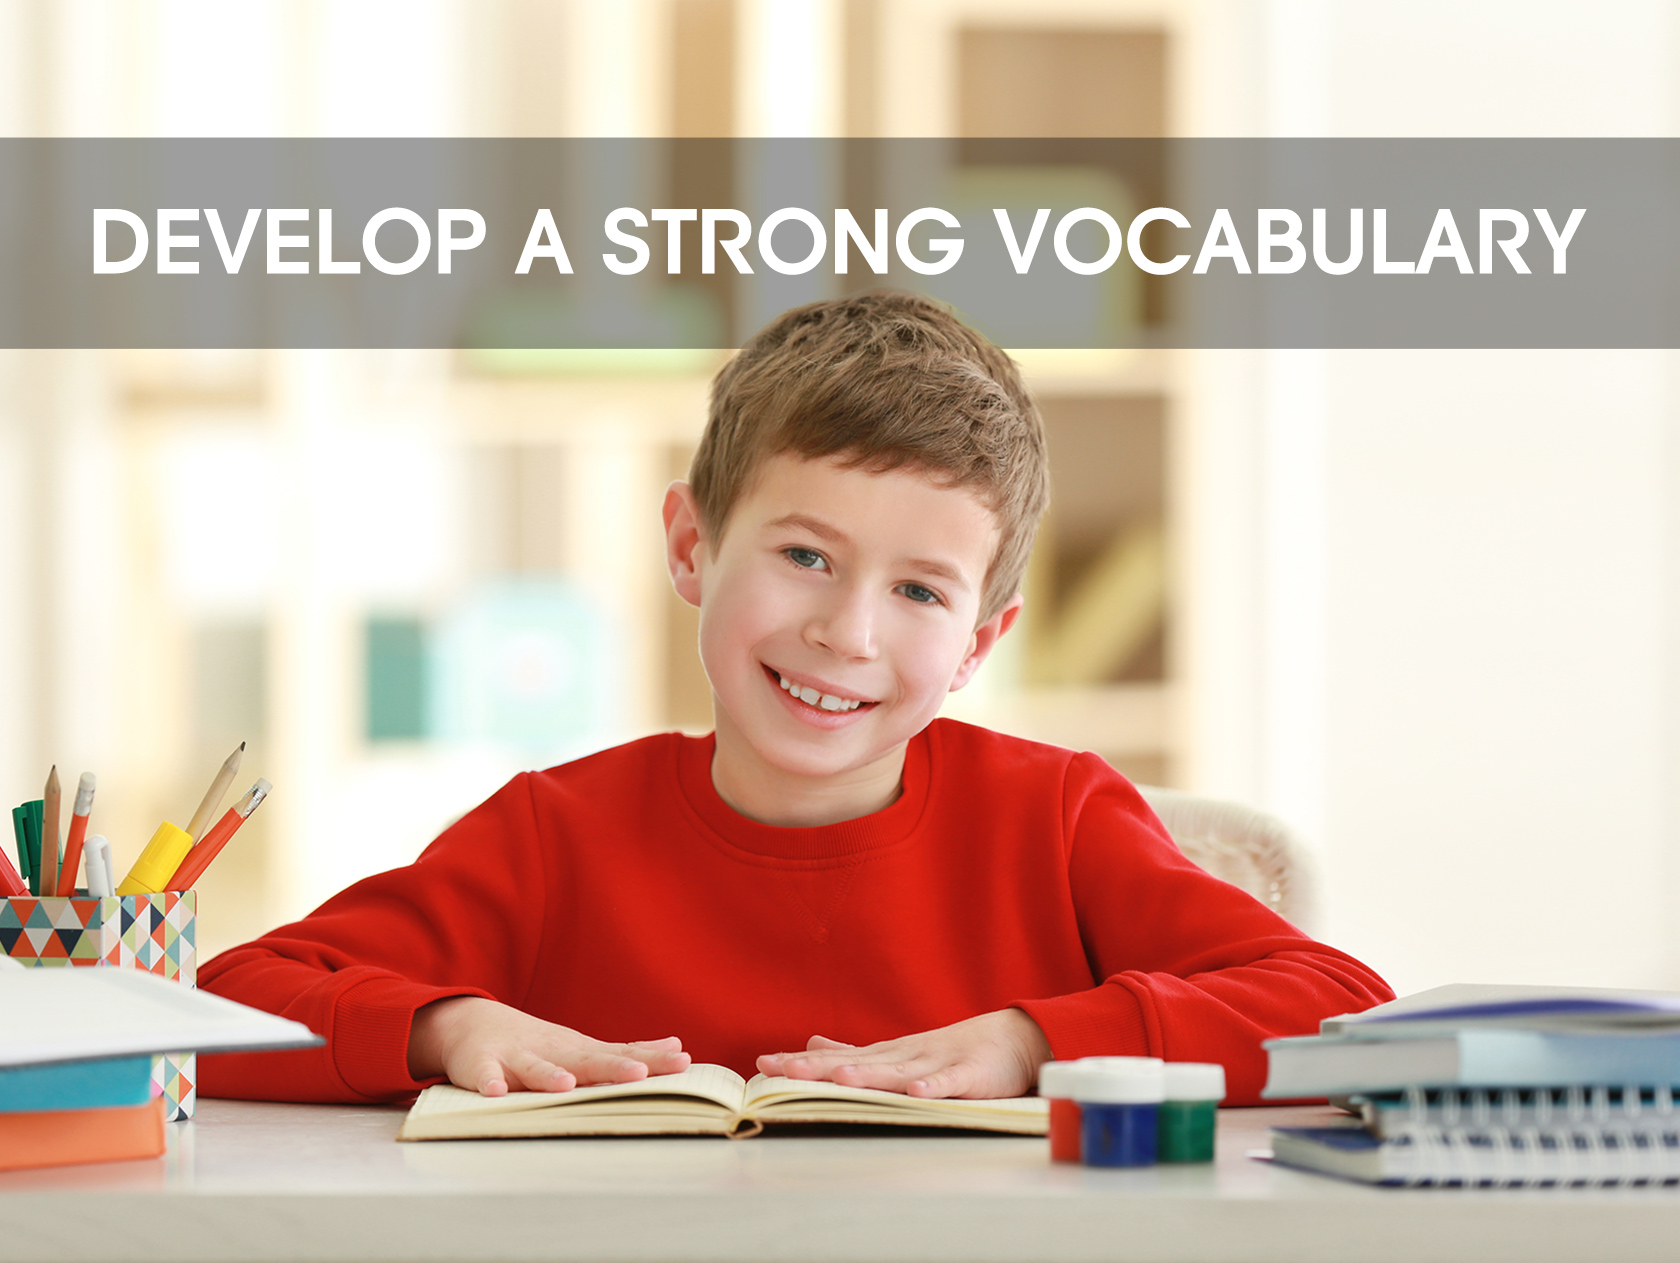 How to Build a Strong Vocabulary